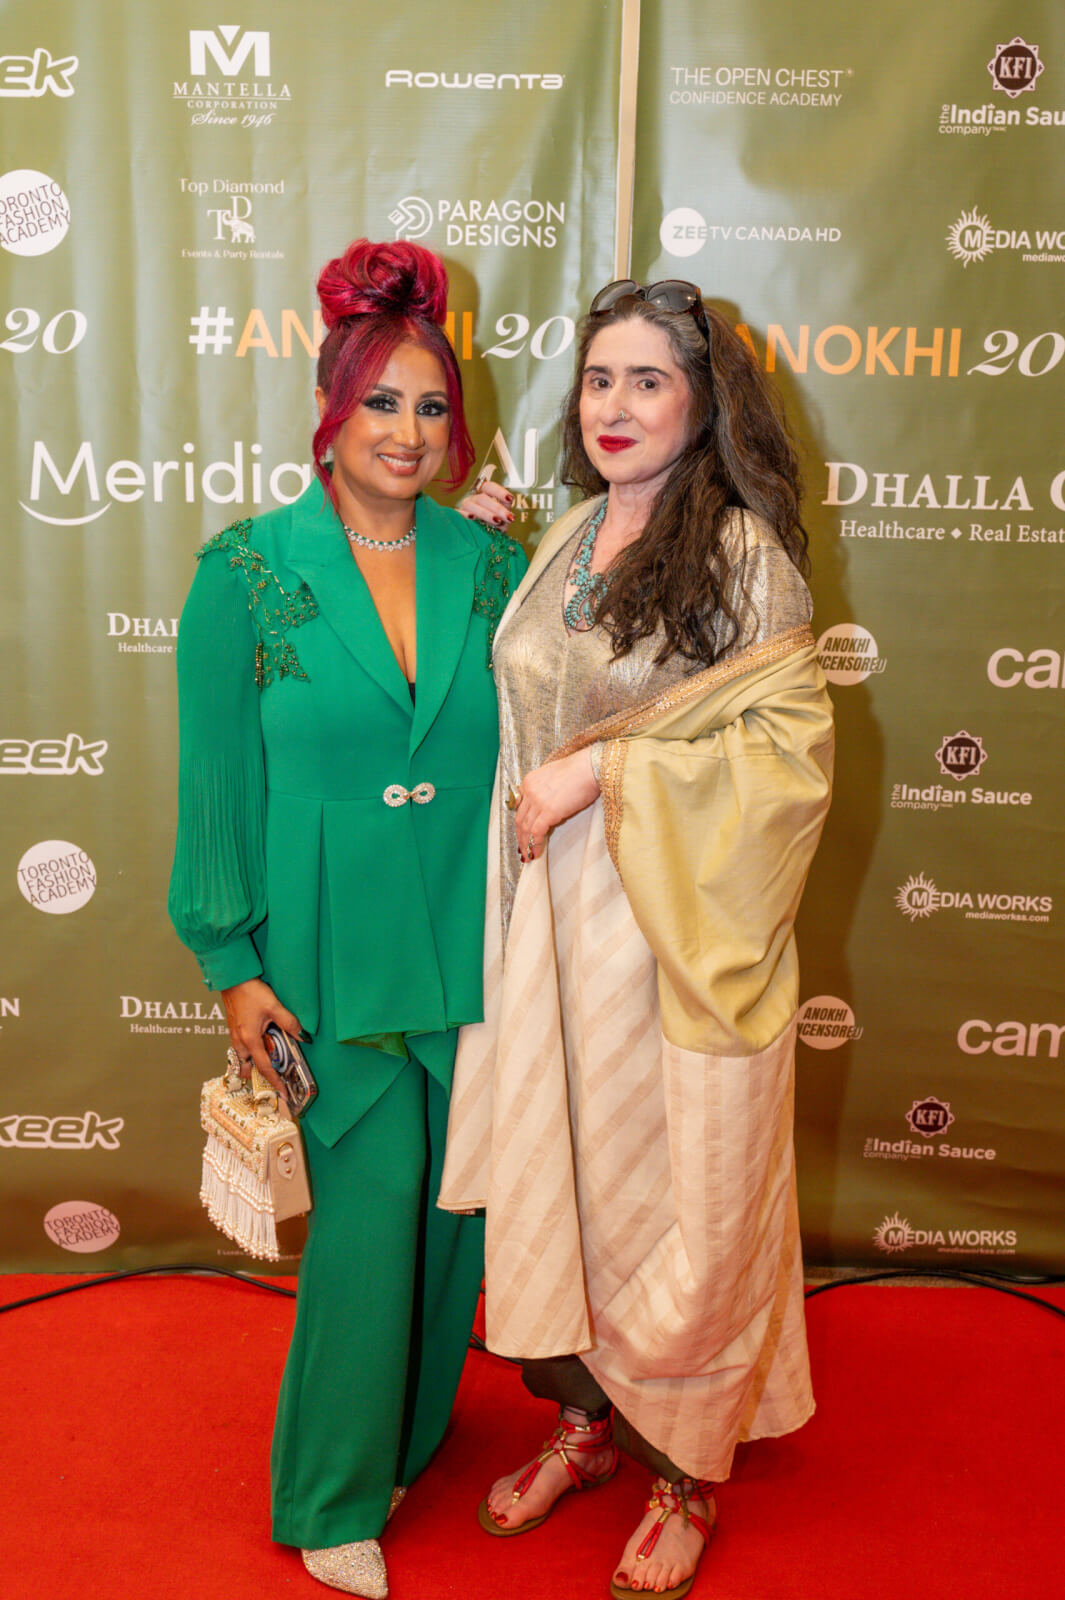 #ANOKHI20: Here’s How You Can Get The Best Beauty Looks From The ANOKHI Emerald Series